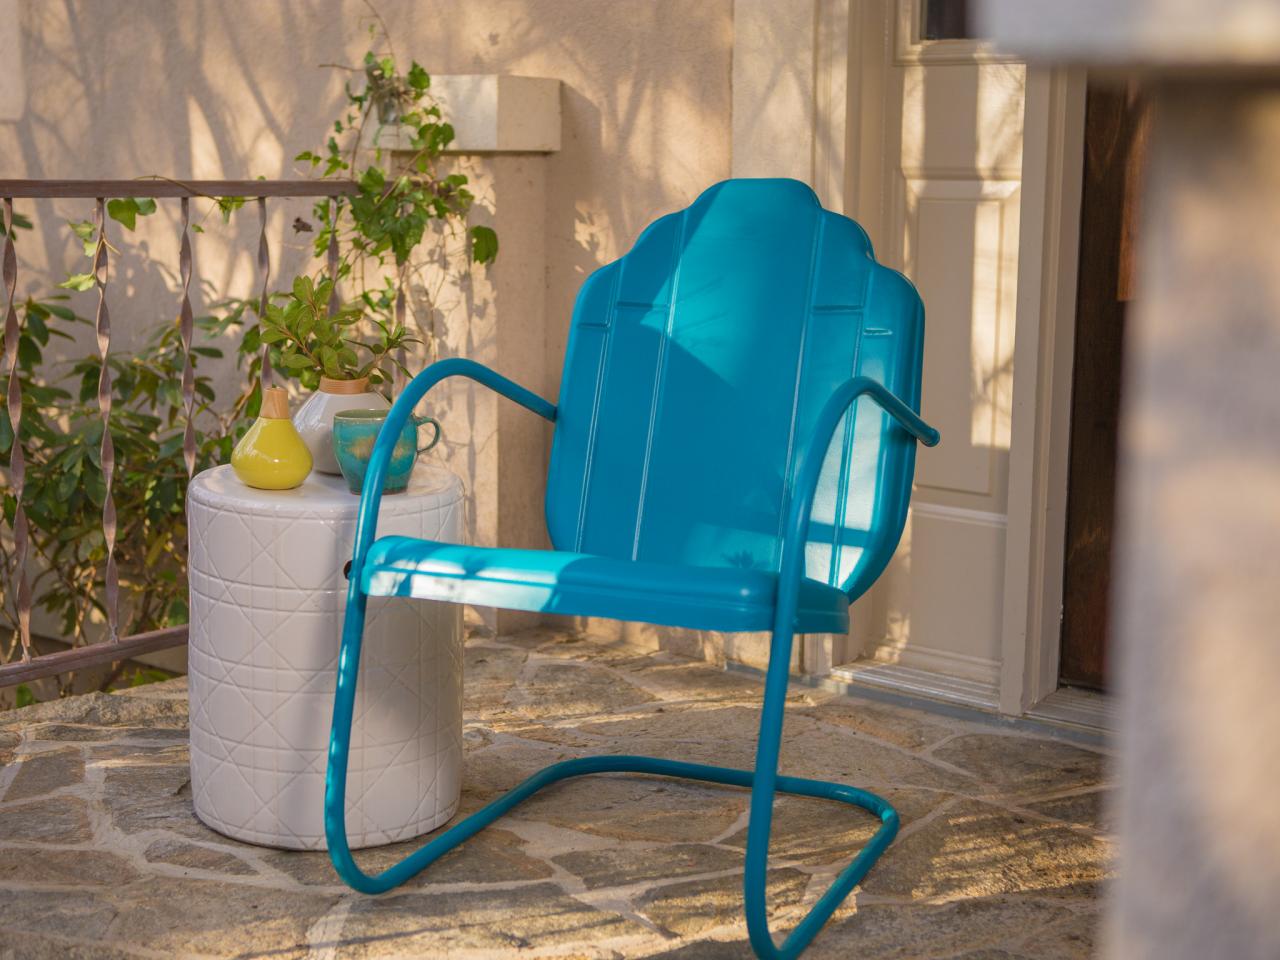 How To Paint An Outdoor Metal Chair, Can You Paint Metal Outdoor Furniture